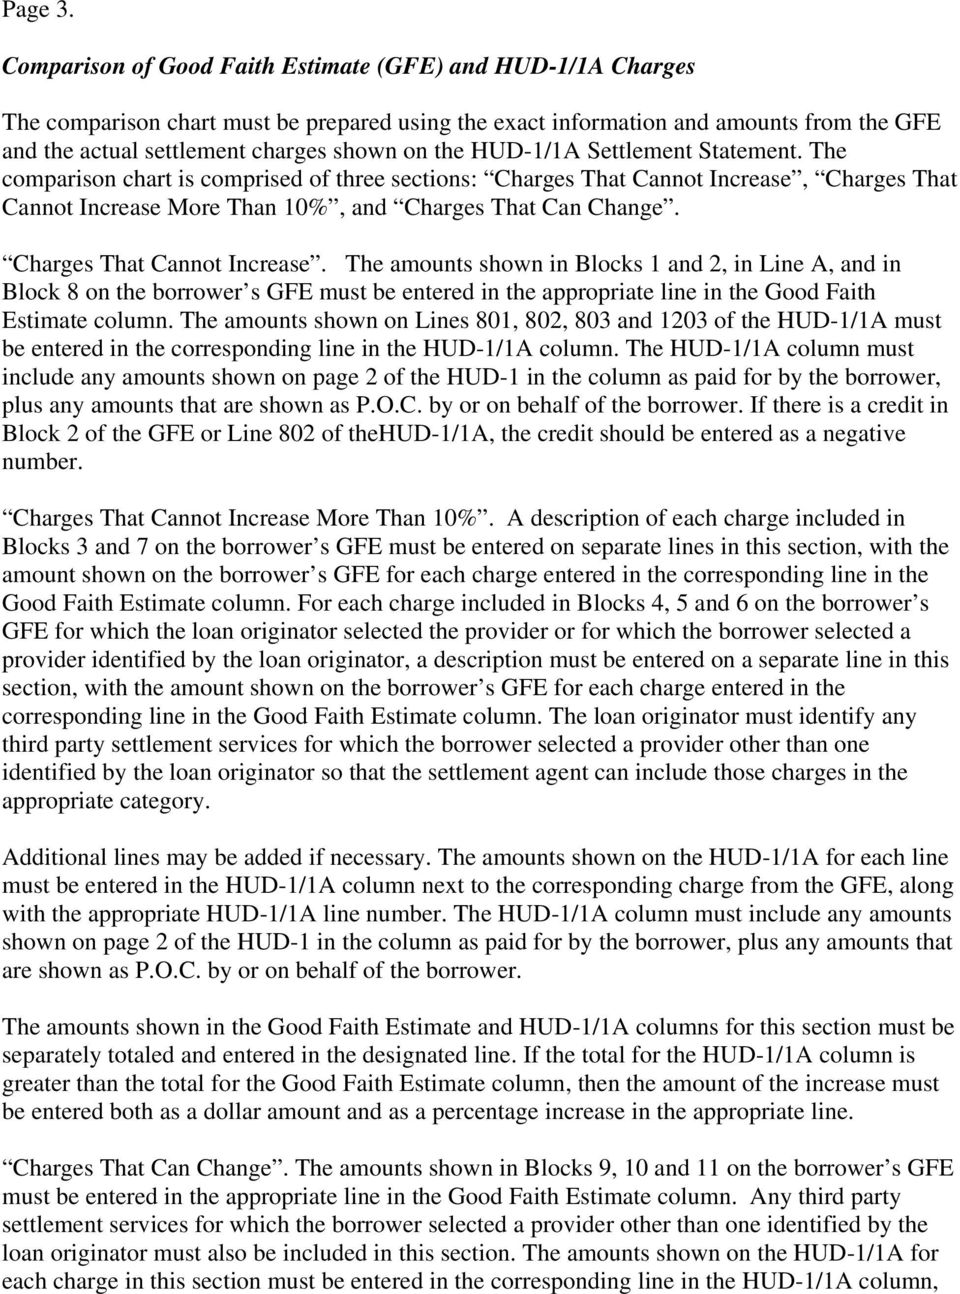 HUD-1/1A Settlement Statement. The comparison chart is comprised of three sections: Charges That Cannot Increase, Charges That Cannot Increase More Than 10%, and Charges That Can Change.